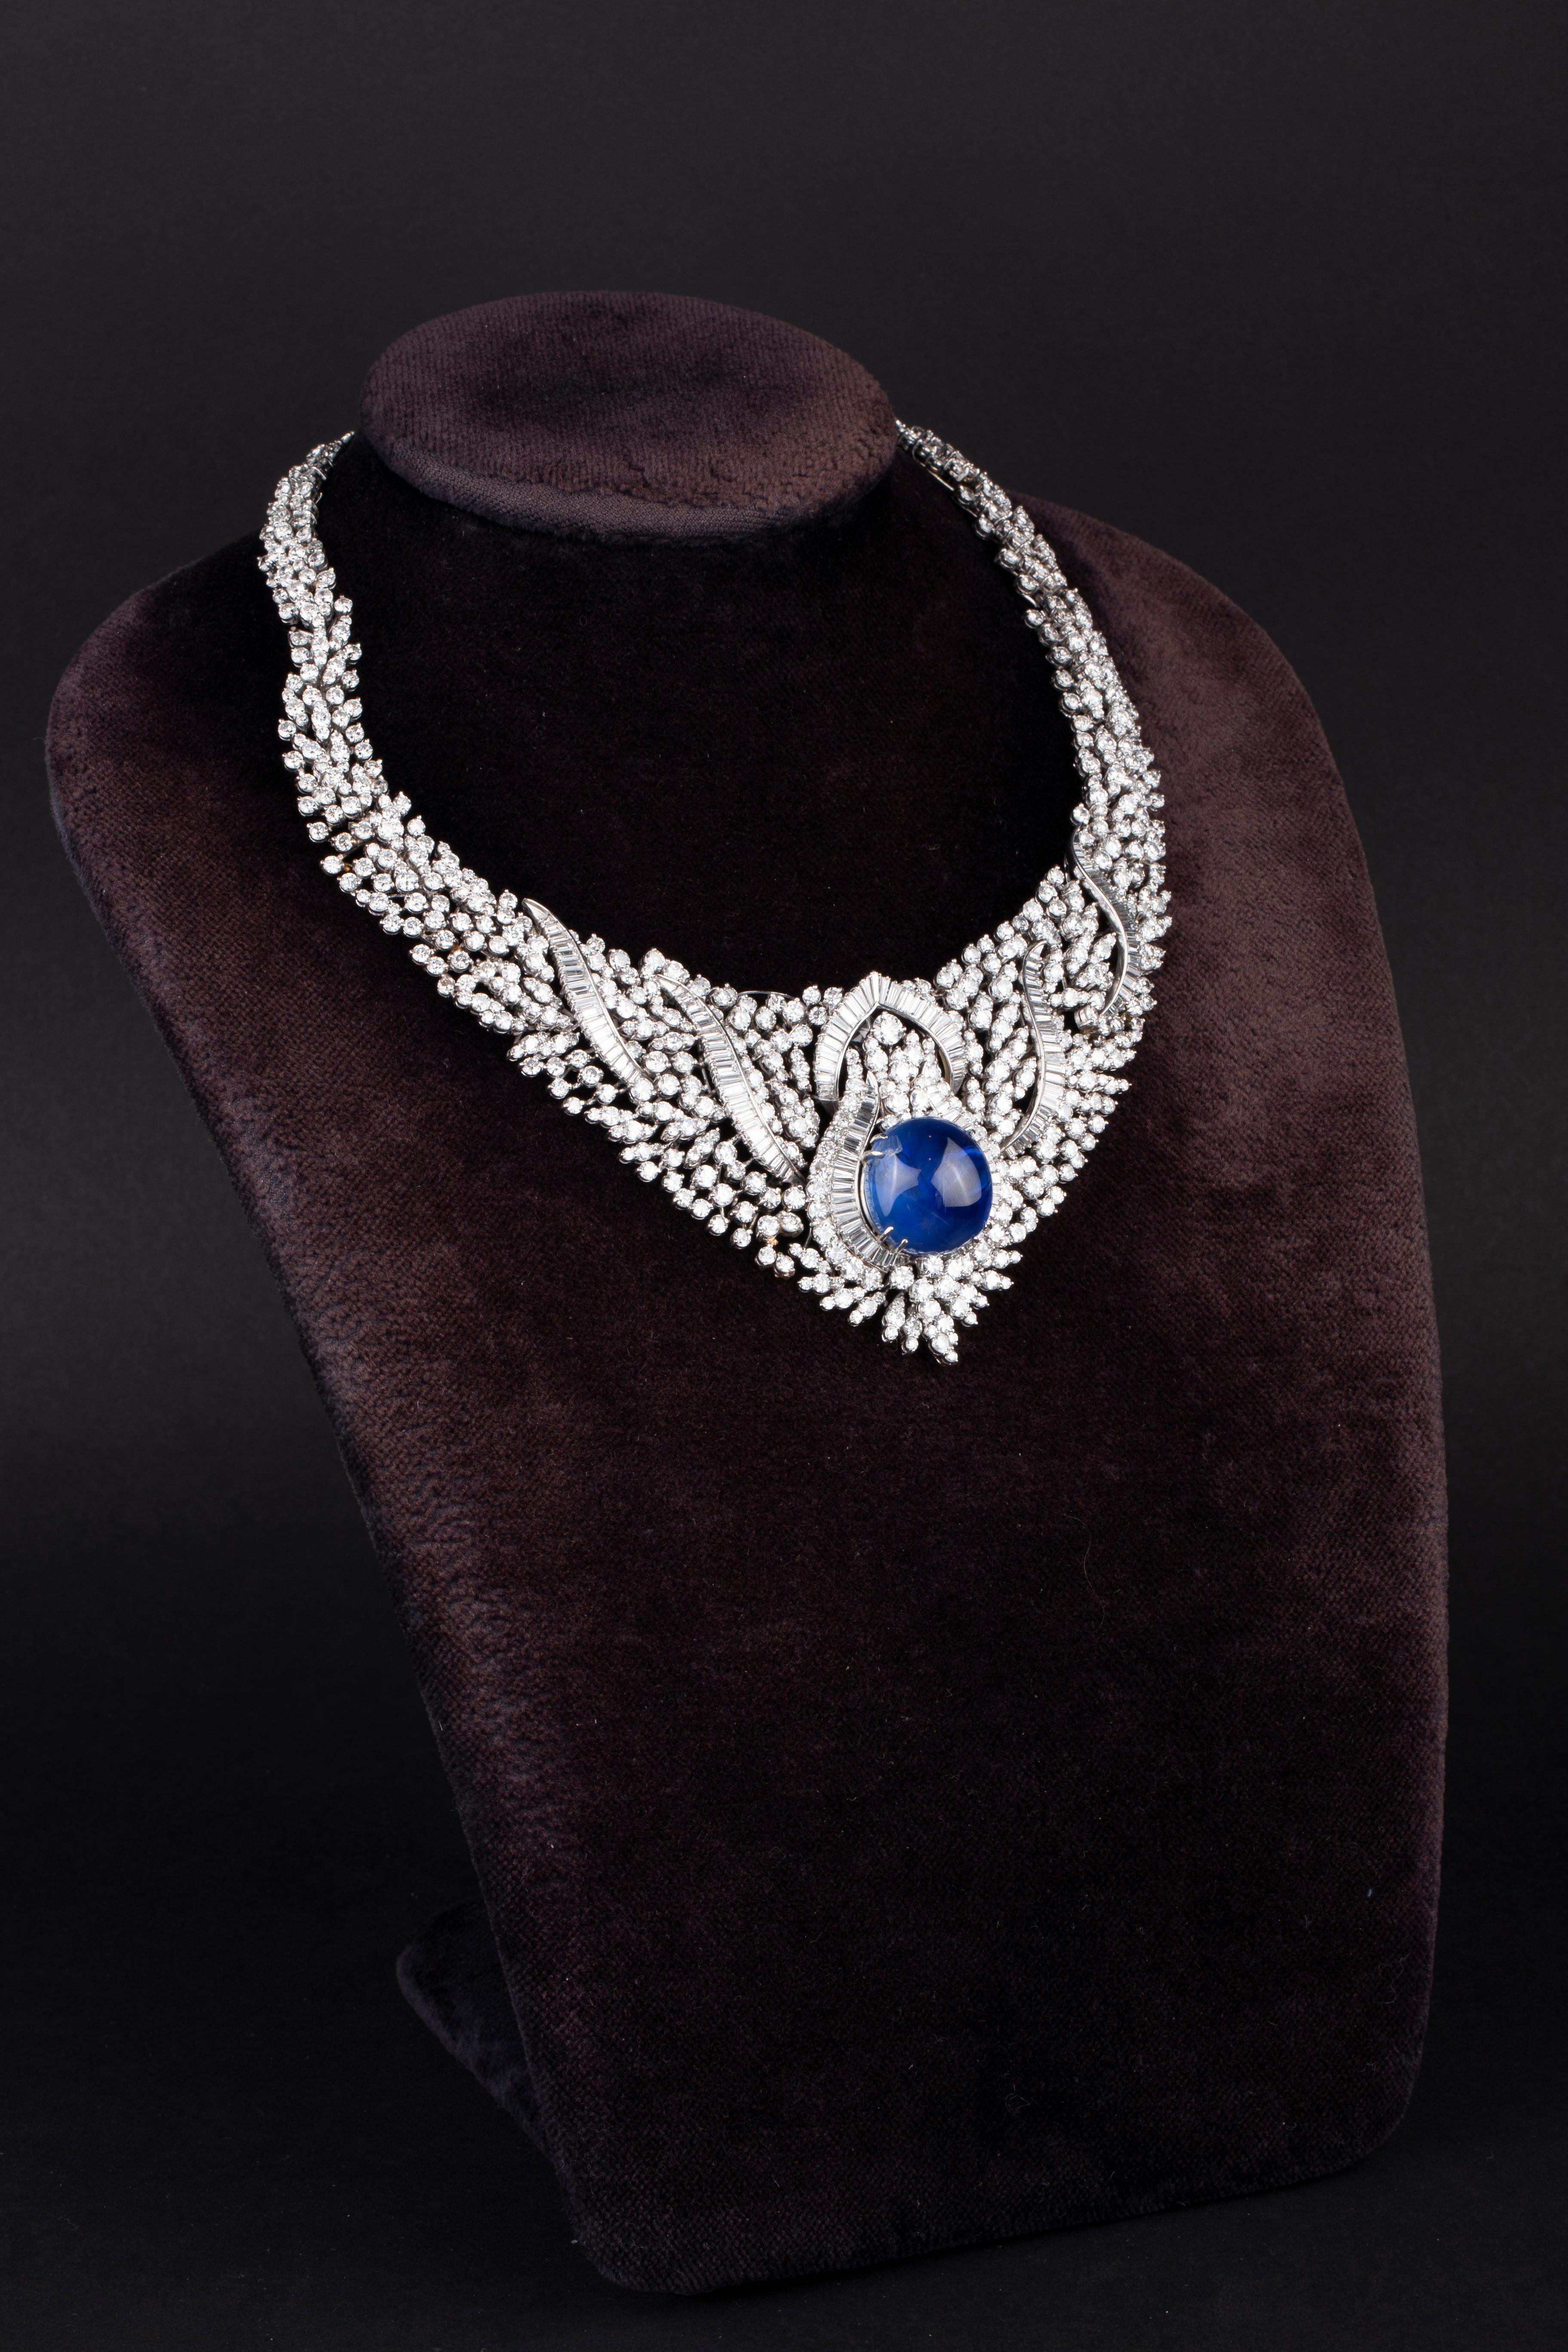 A stunning bib necklace in white gold centering a 39.4 carat blue cabochon sapphire framed by 50 carats of round brilliant and emerald cut diamonds. Circa 1950s.